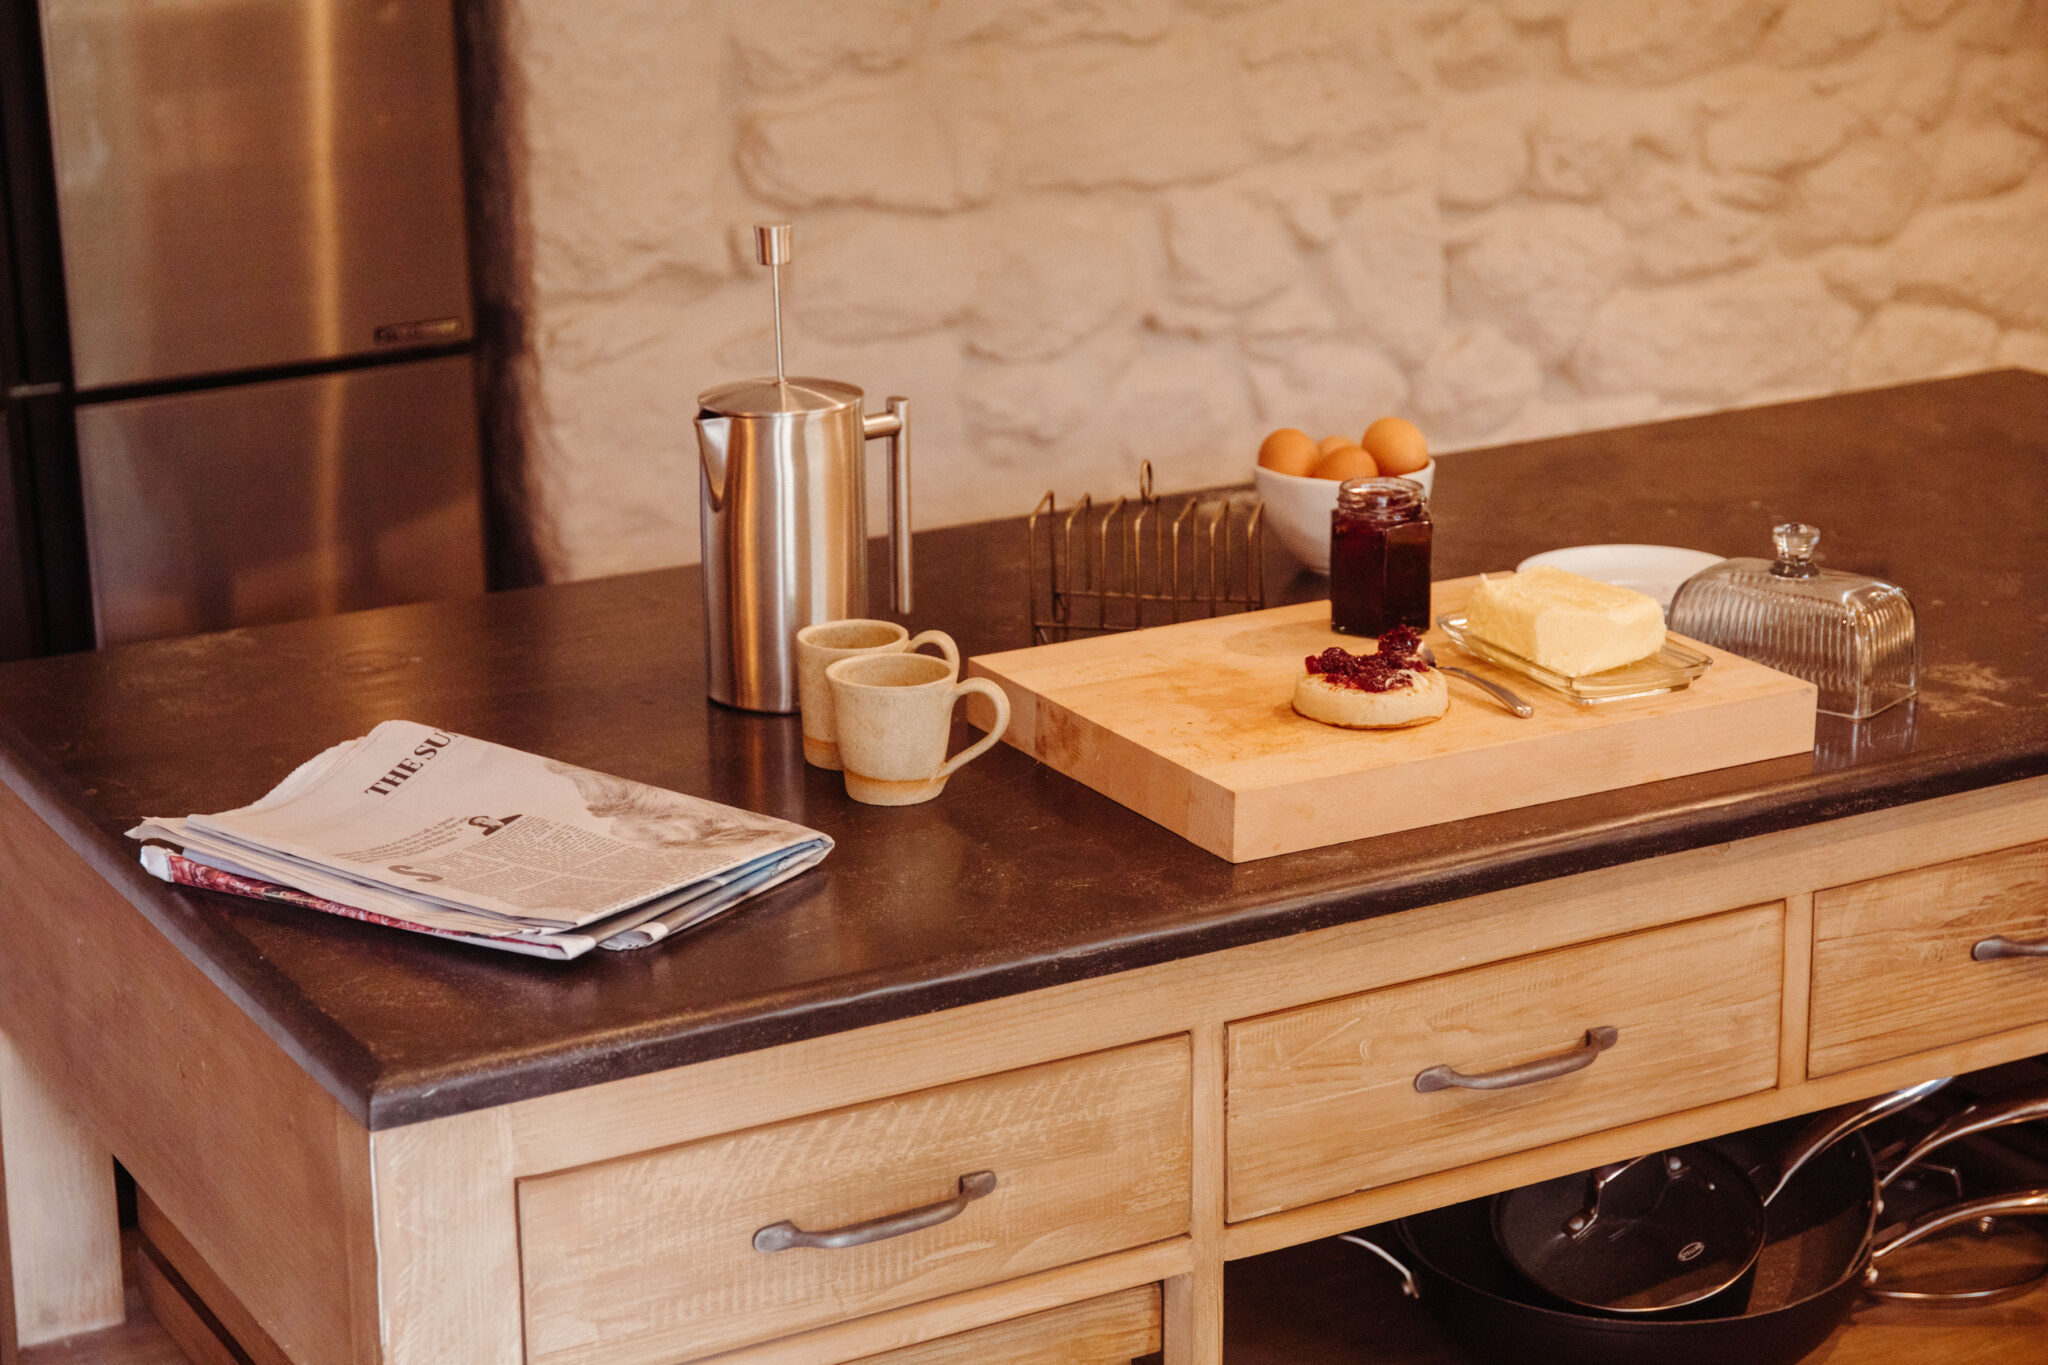 Coffee, papers, crumpets and jam on a kitchen island